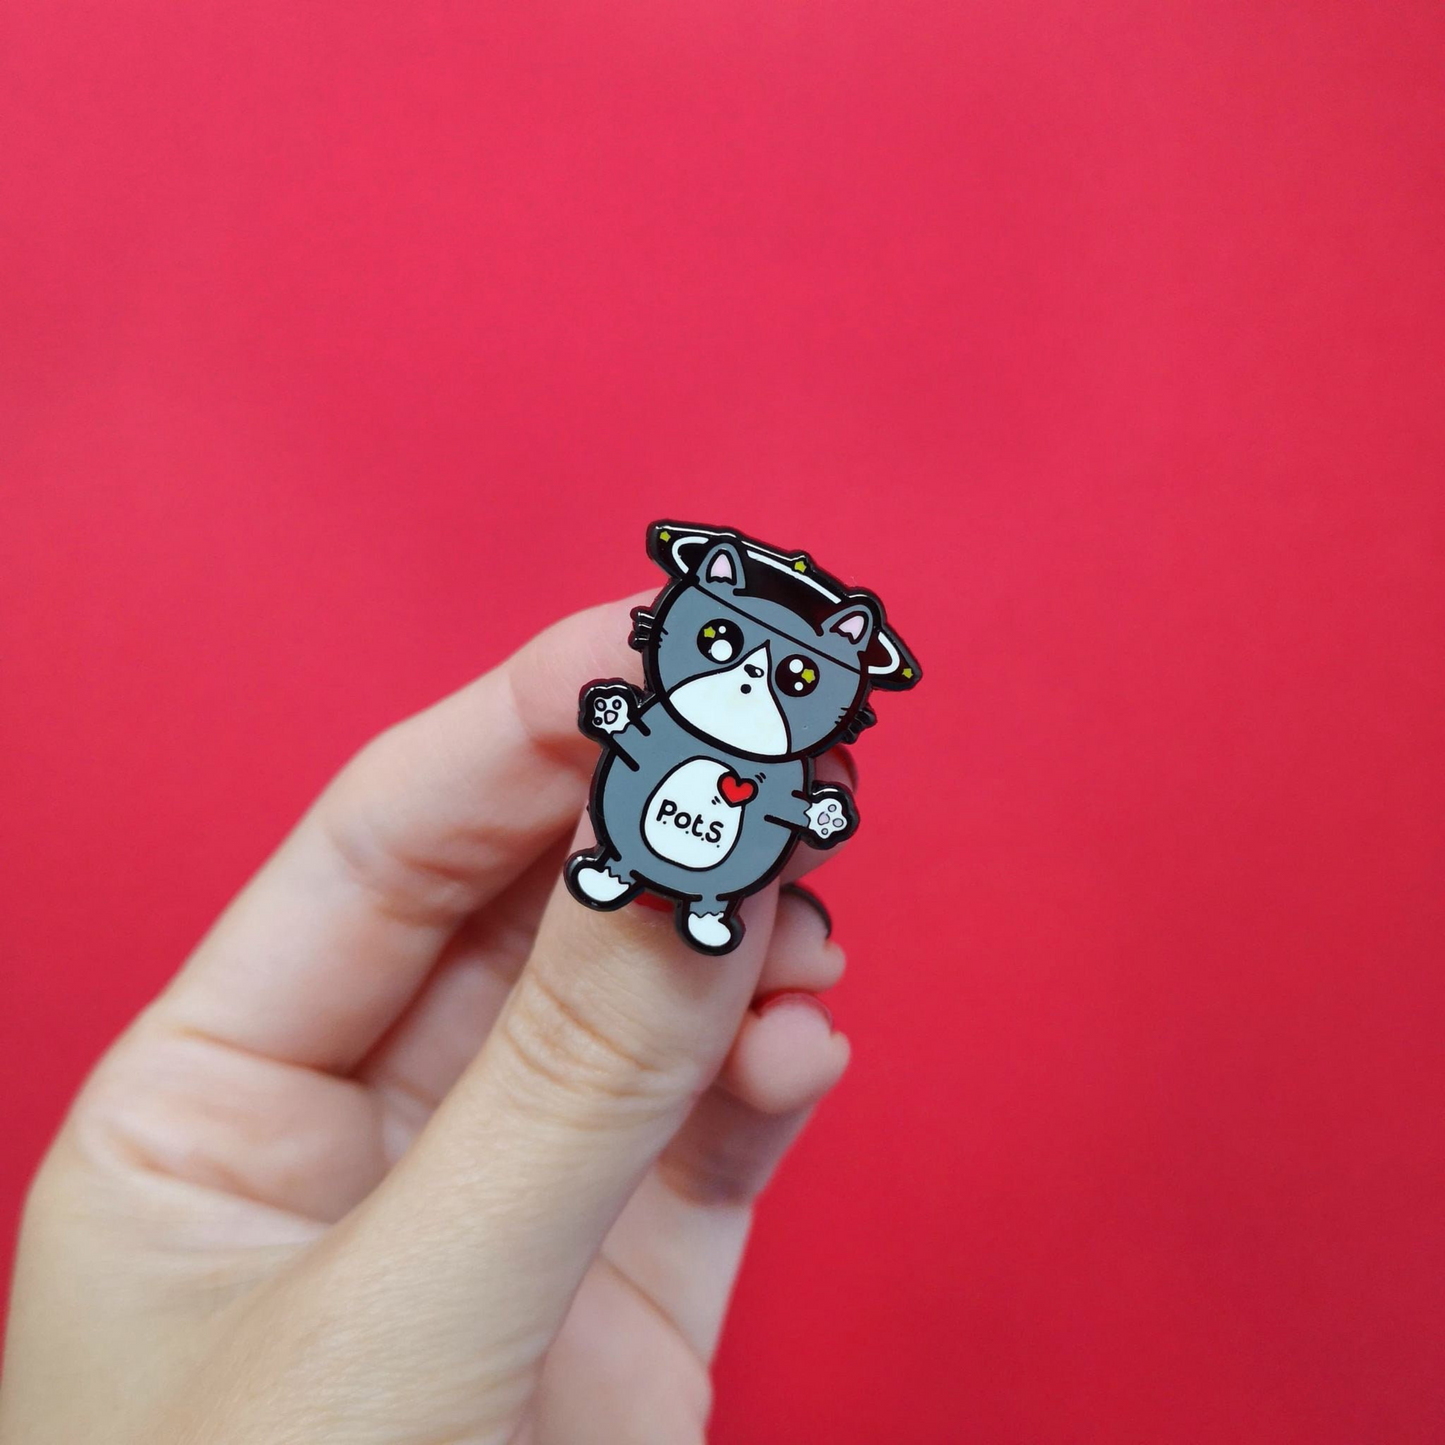 An enamel pin of a cat illustration with spinning dizzy stars around its head with its paws outstretched and postural tachycatdid syndrome (pots) written on its belly it is on a red background with a hand holding it. Postural tachycardia syndrome (PoTS) is when your heart rate increases very quickly after getting up from sitting or lying down.